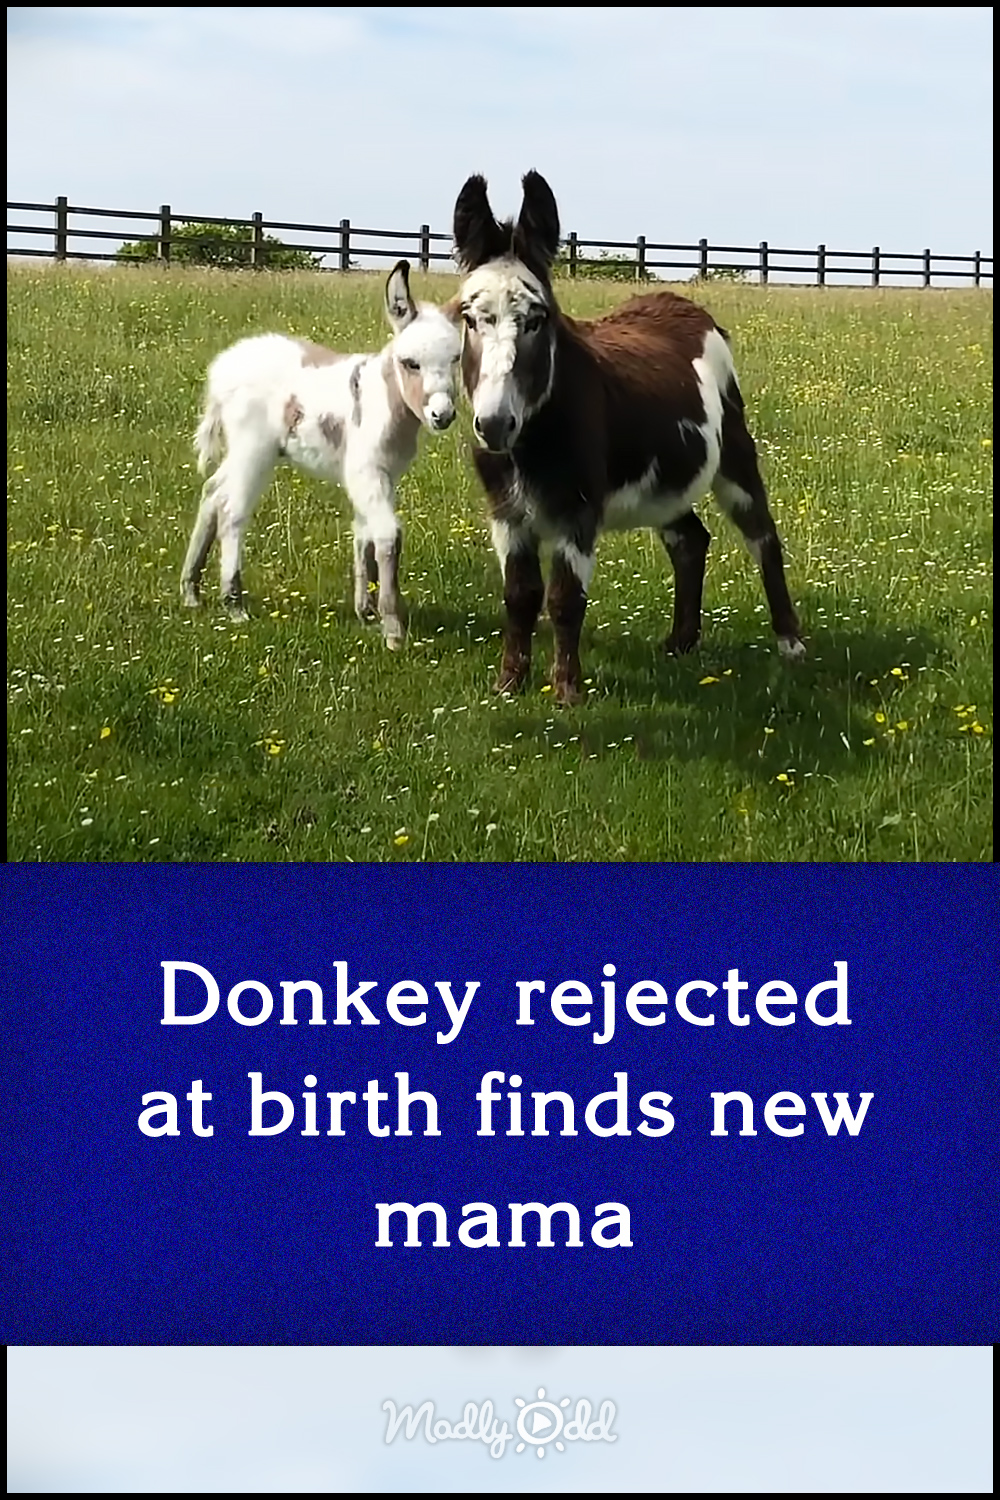 Donkey rejected at birth finds new mama